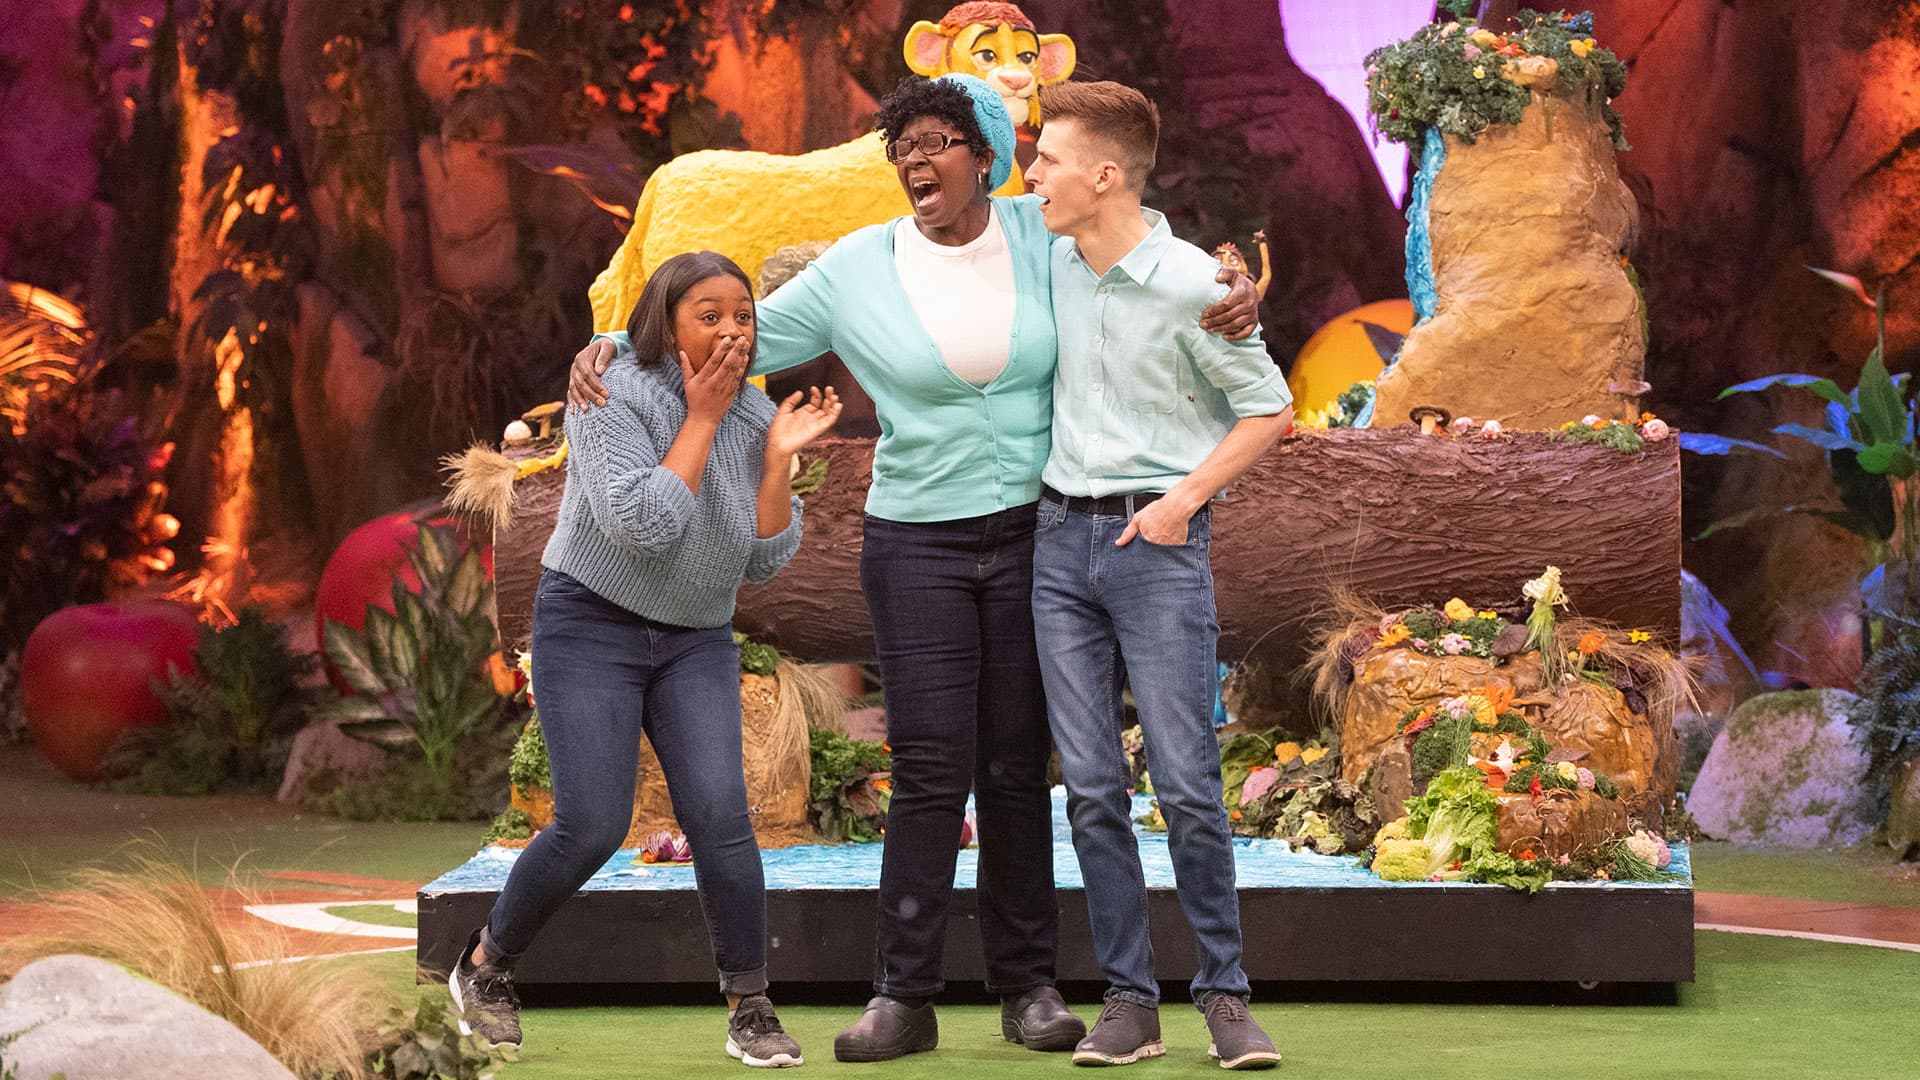 London, Schellie and Austin react to learning they have won the “Lion King: Queen of the Jungle” contest on Disney’s “Foodtastic.”